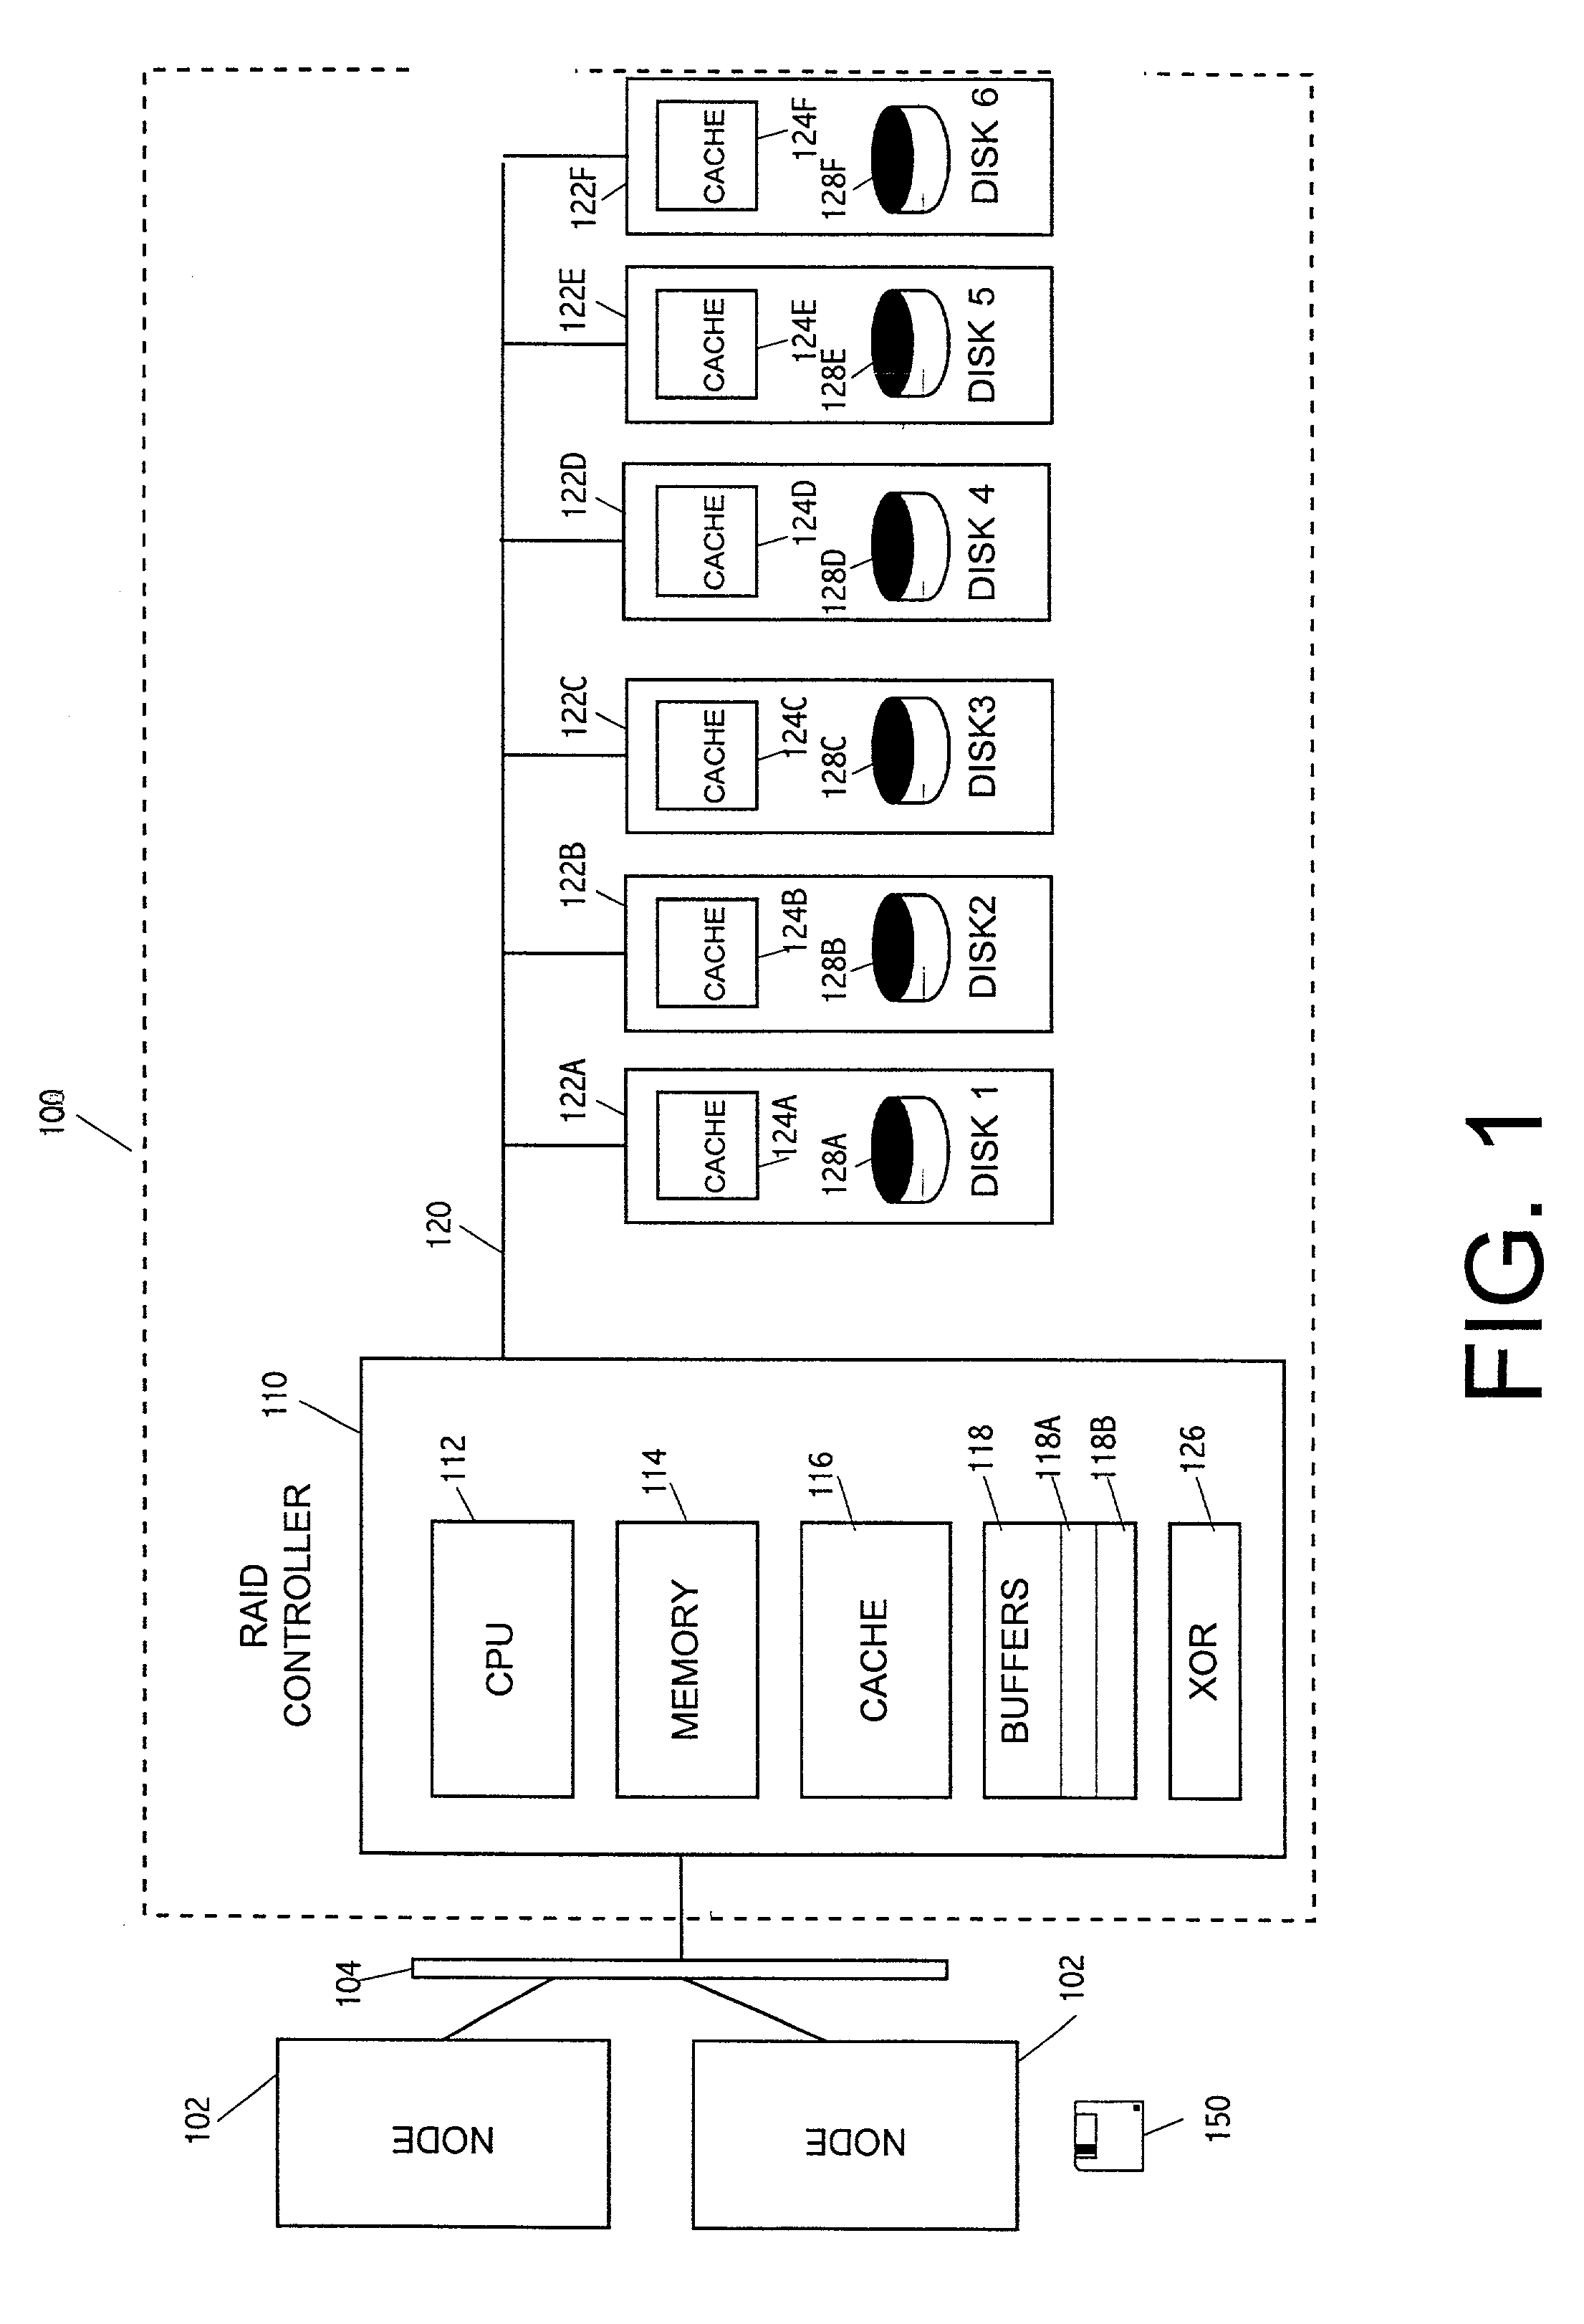 Method and apparatus for supporting parity protected raid in a clustered environment